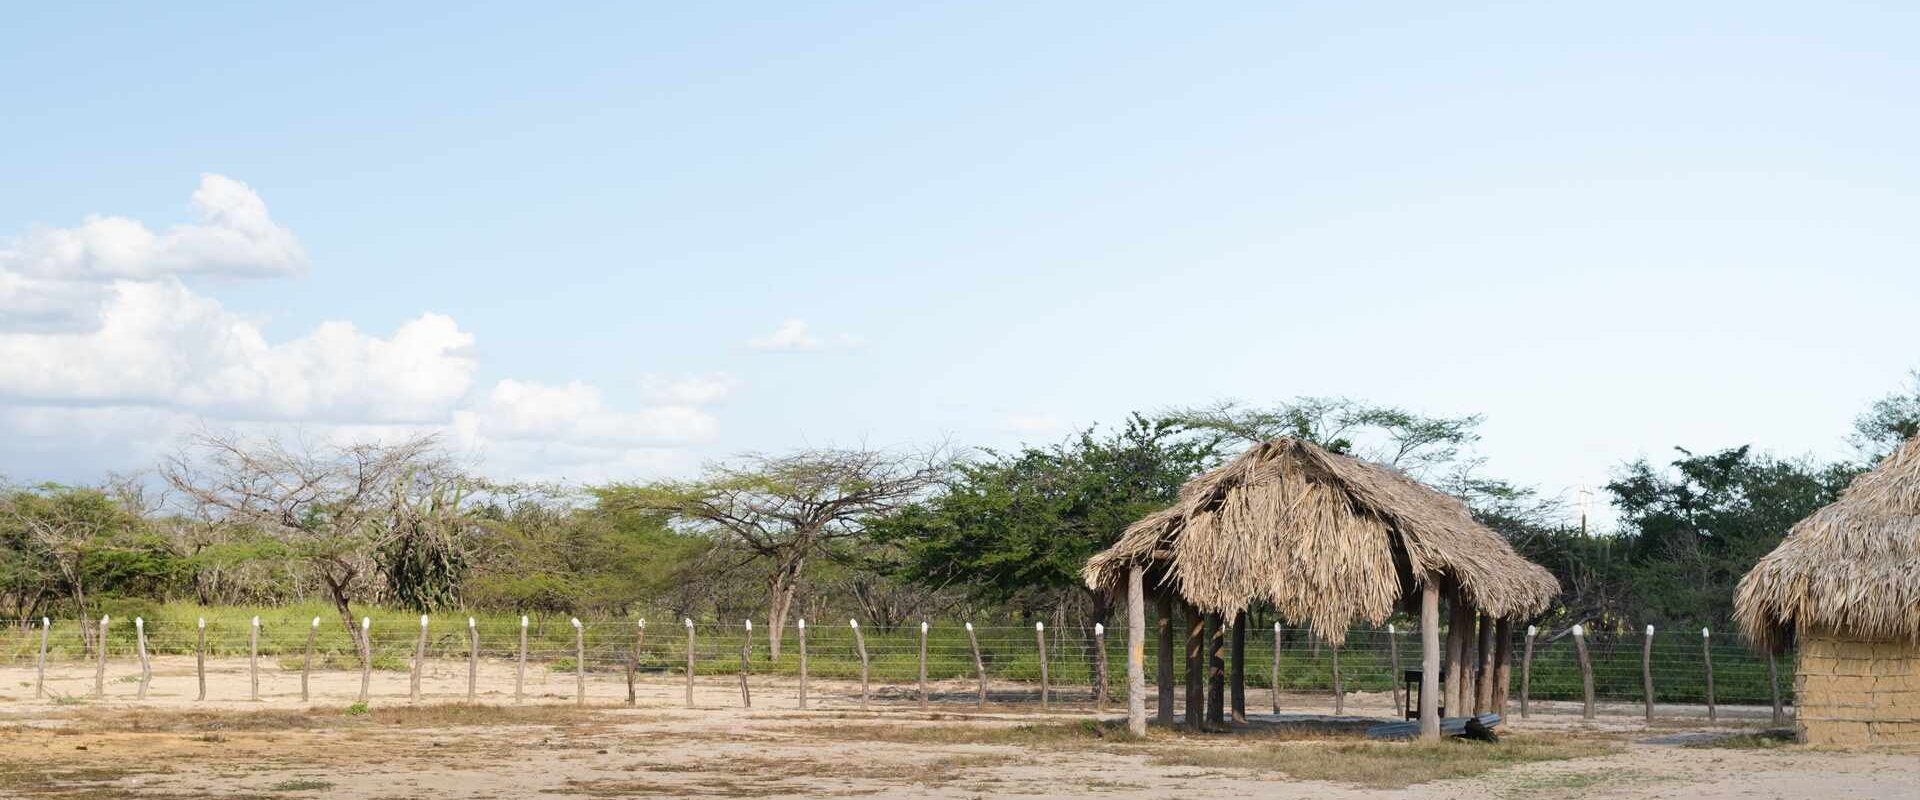 Landscape with buildings in typical Wayuu ranch in Guajira. Colombia. Copy space.